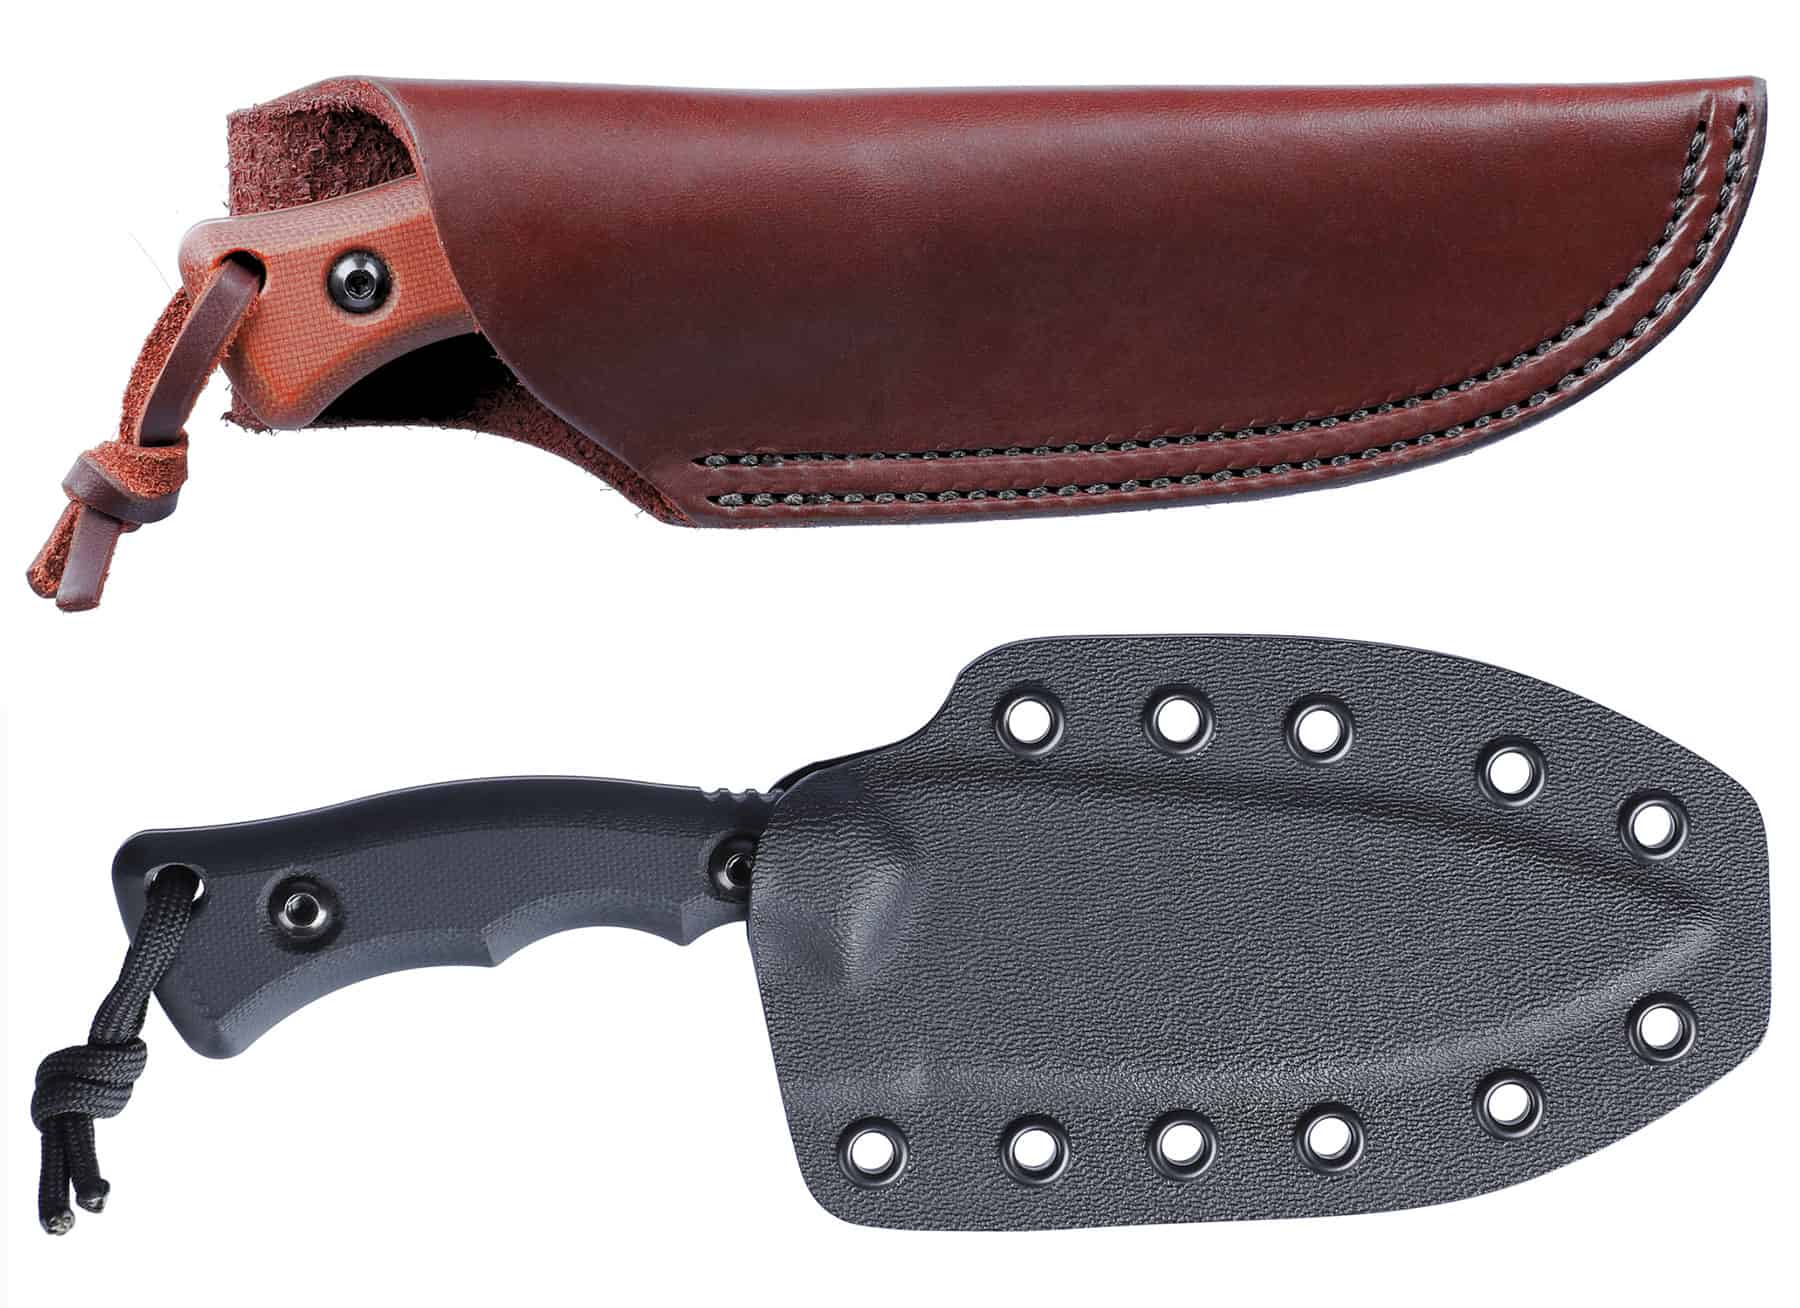 The stonewashed version of the Bugsy ships with a brown leather sheath, and the all black version of the Bugsy ships with a kydex sheath.